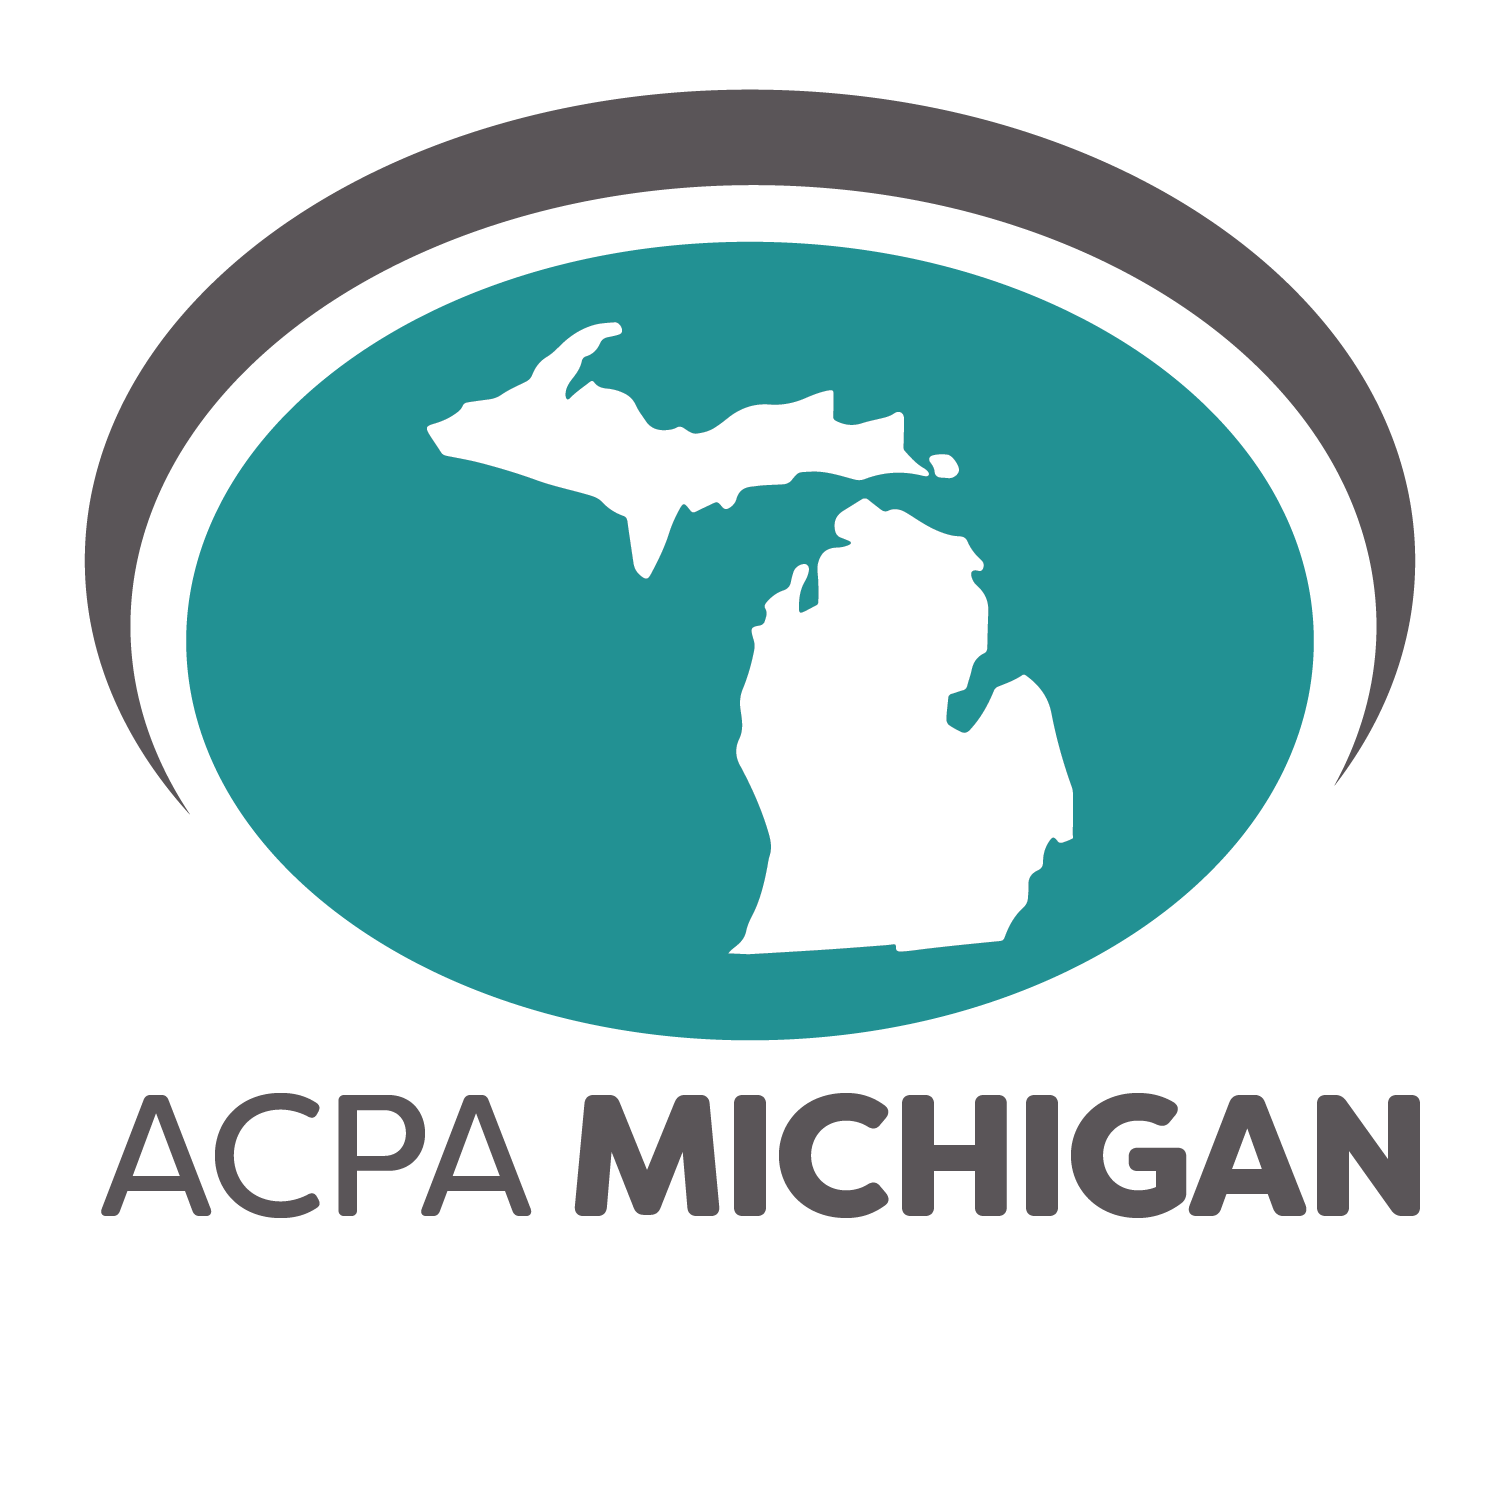 ACPA MI Logo. Teal oval housing the shape of the state of Michigan with the text ACAP MICHIGAN on the bottom